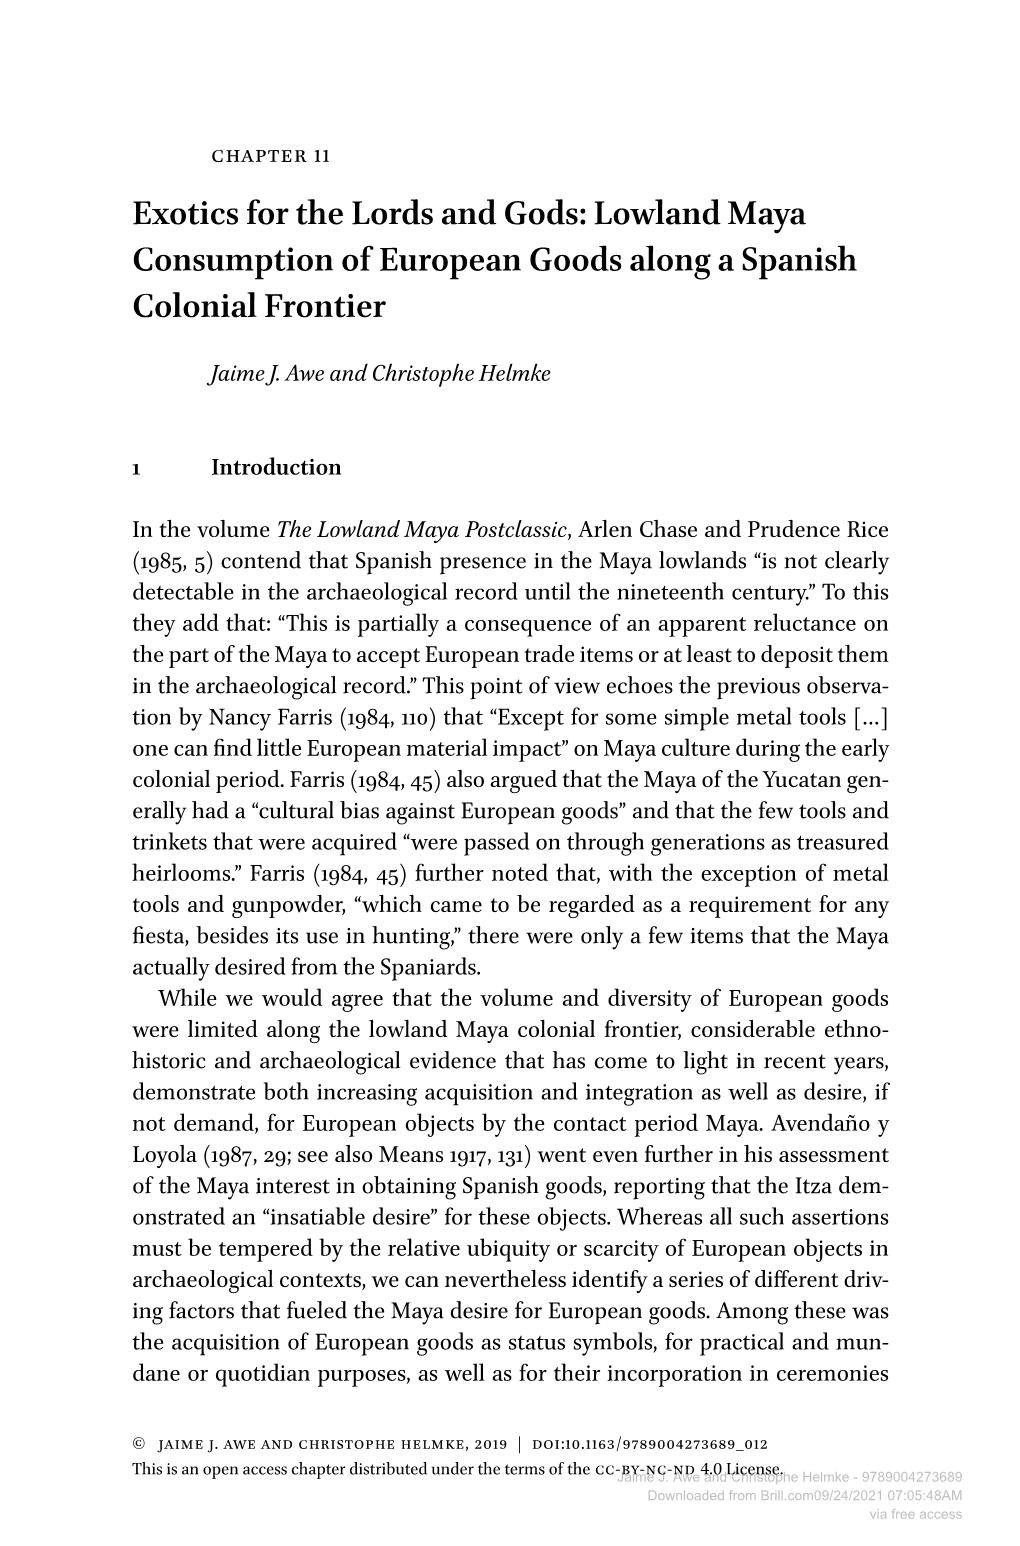 Exotics for the Lords and Gods: Lowland Maya Consumption of European Goods Along a Spanish Colonial Frontier